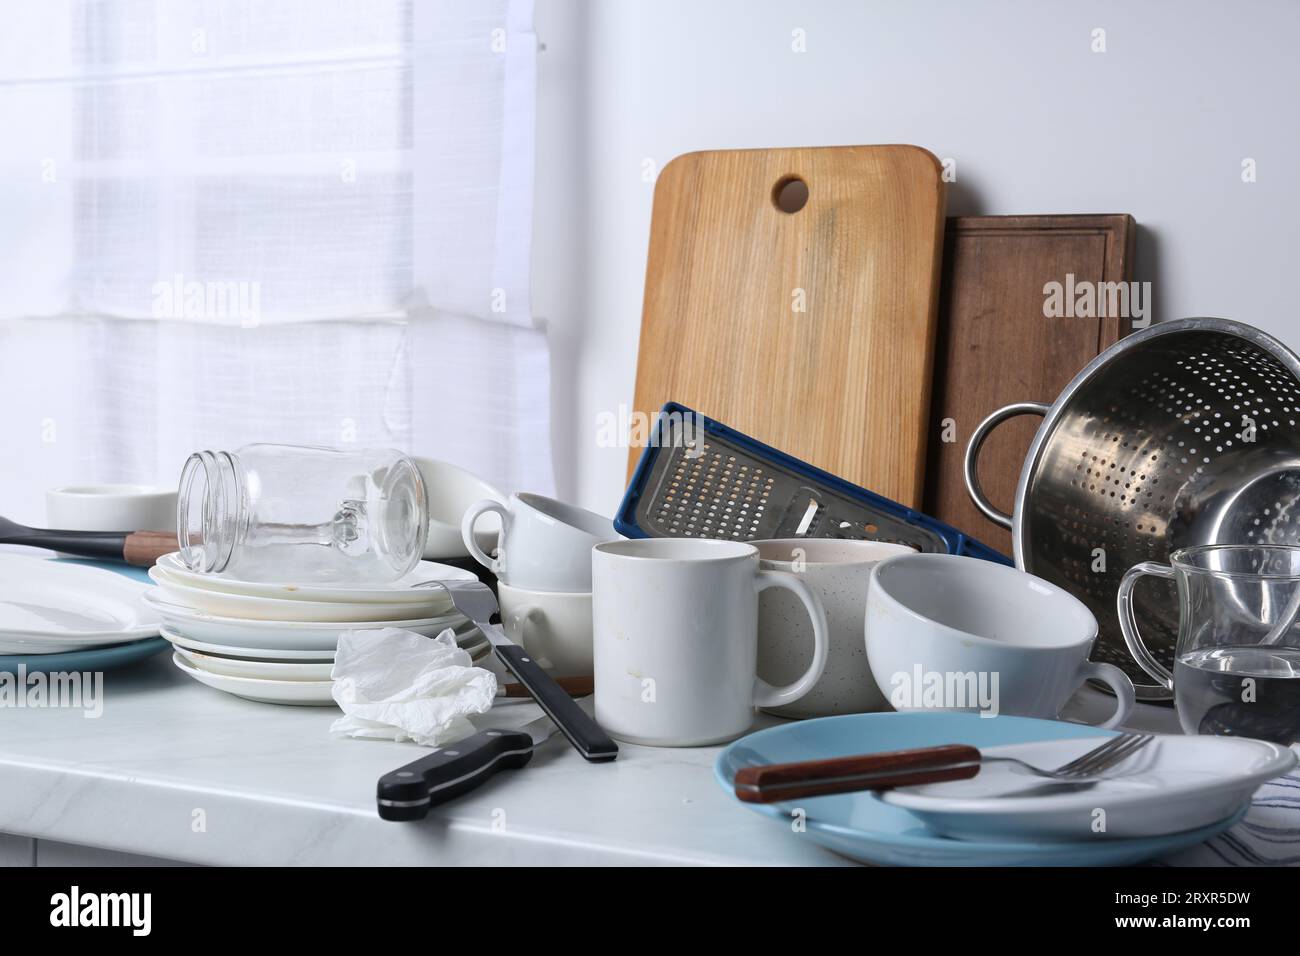 Many dirty utensils and dishware on countertop in messy kitchen Stock Photo